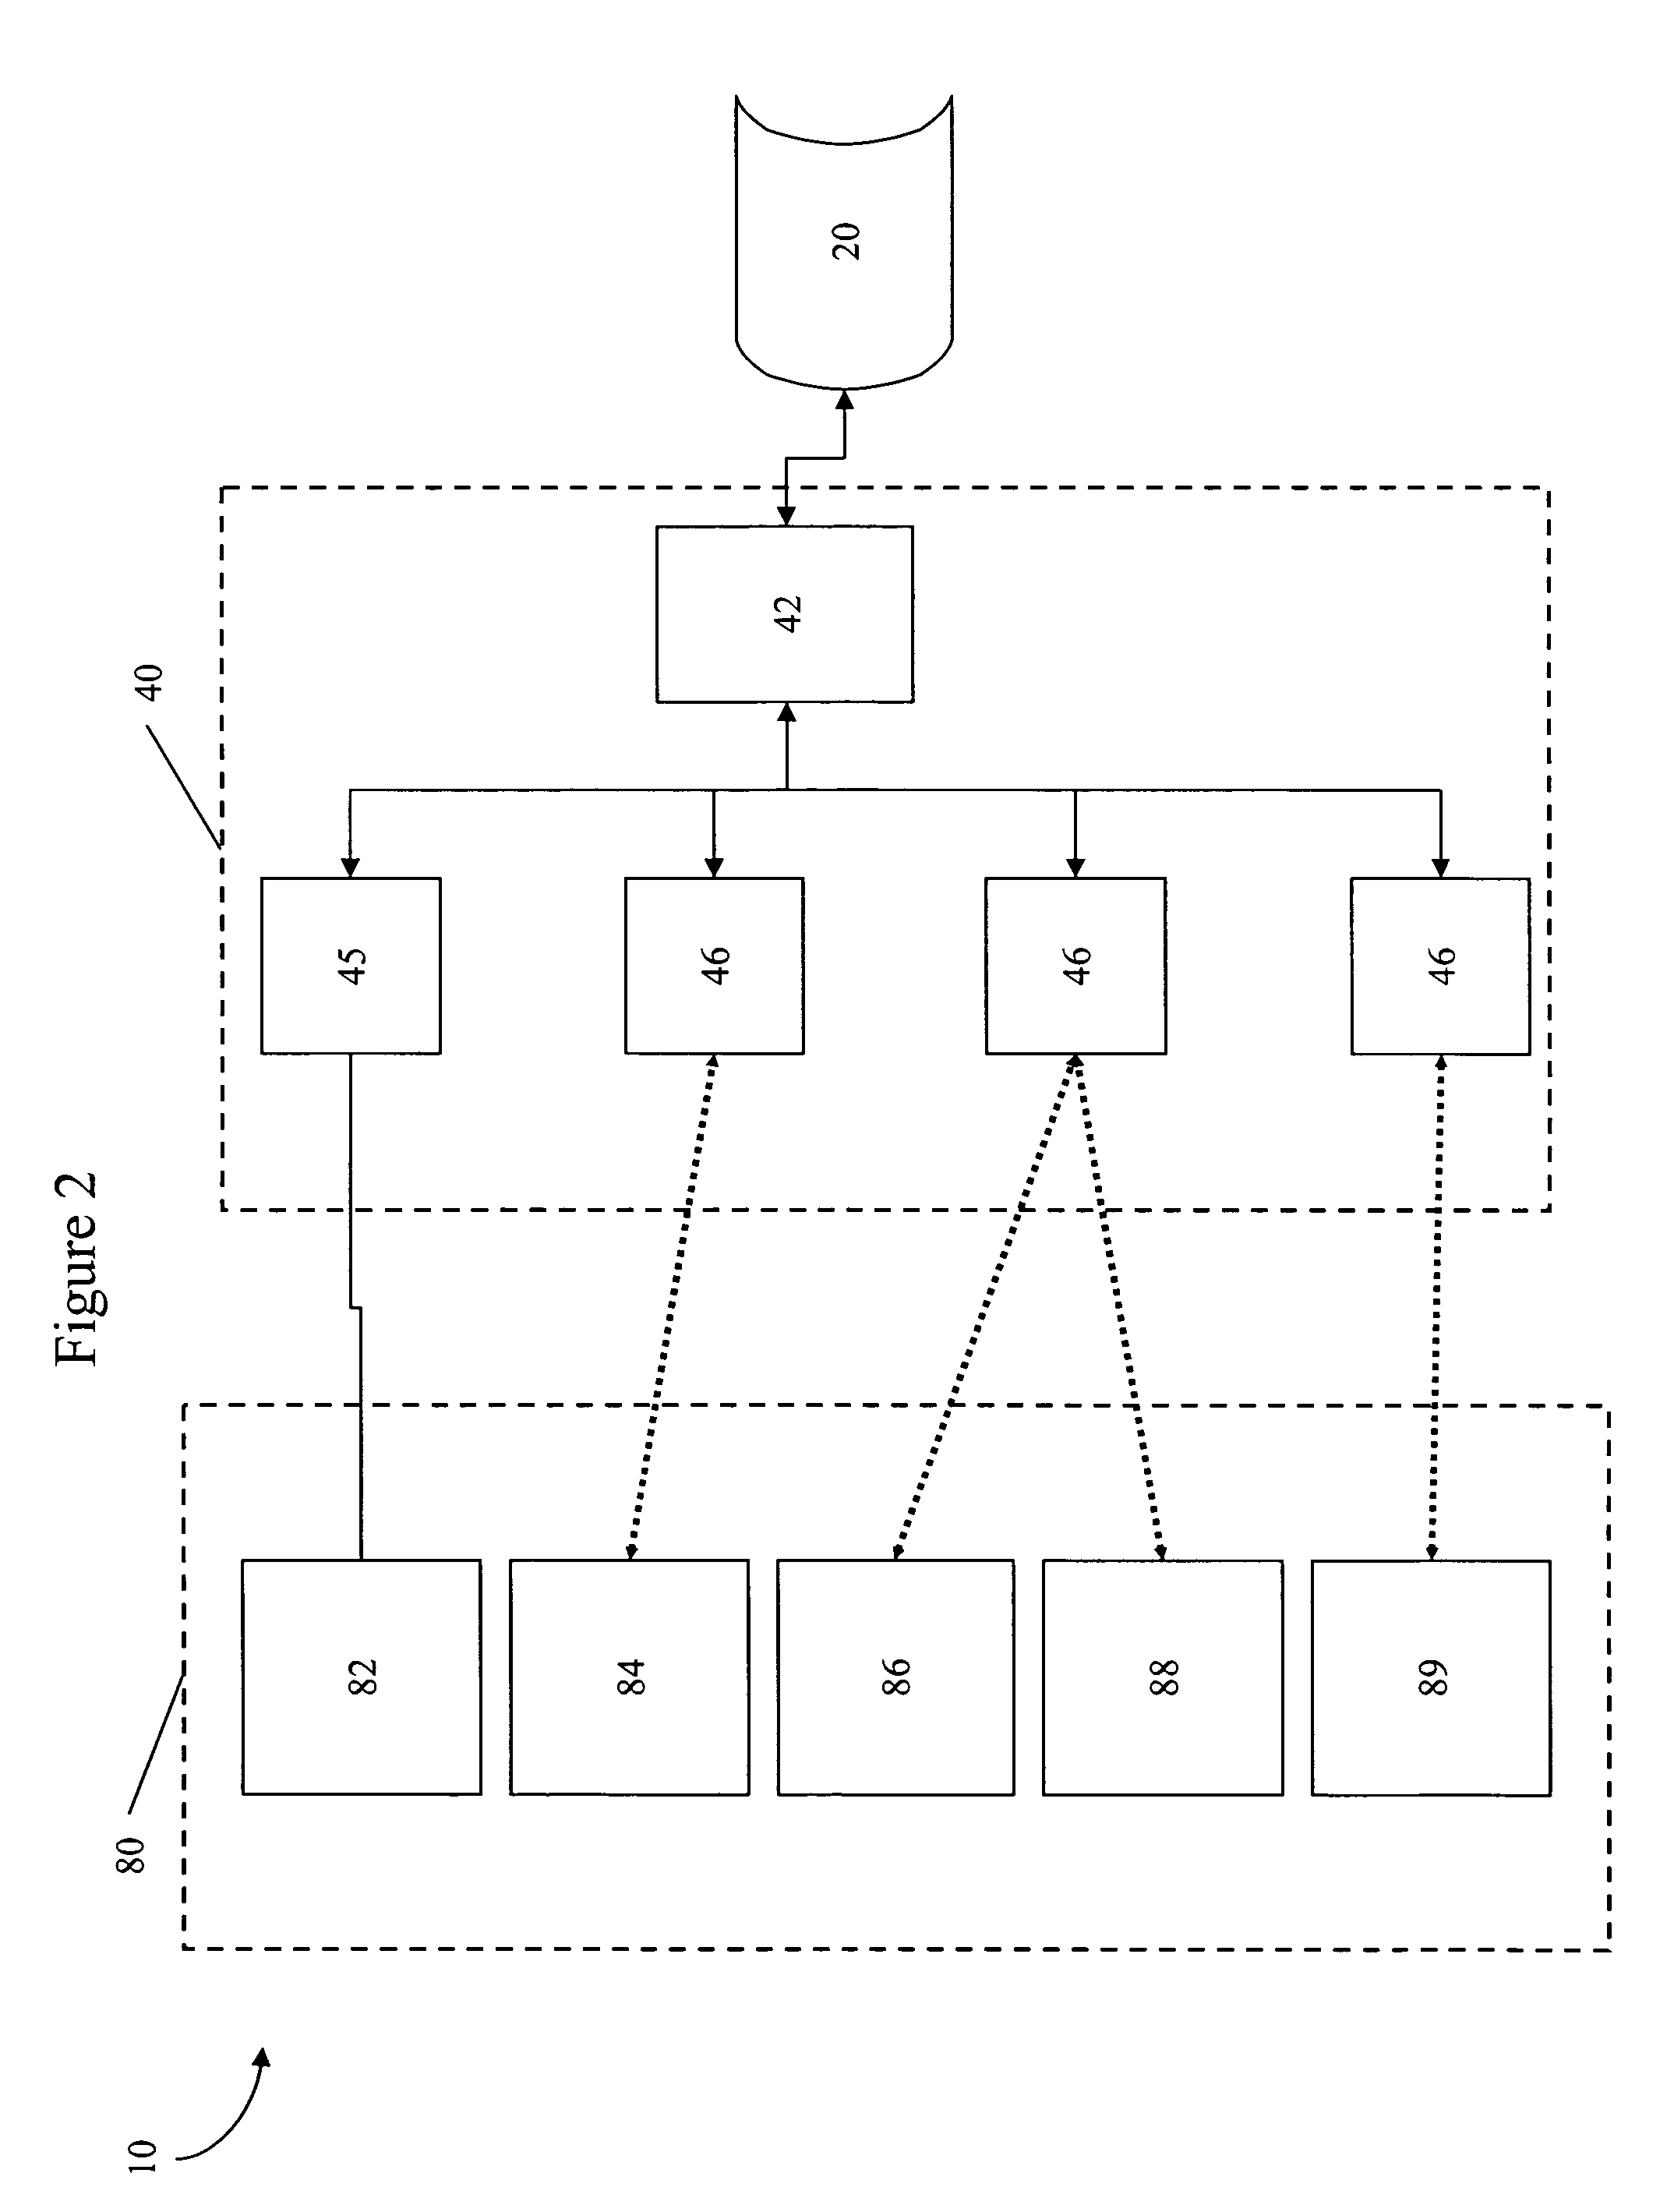 Interactive audio content delivery system and method